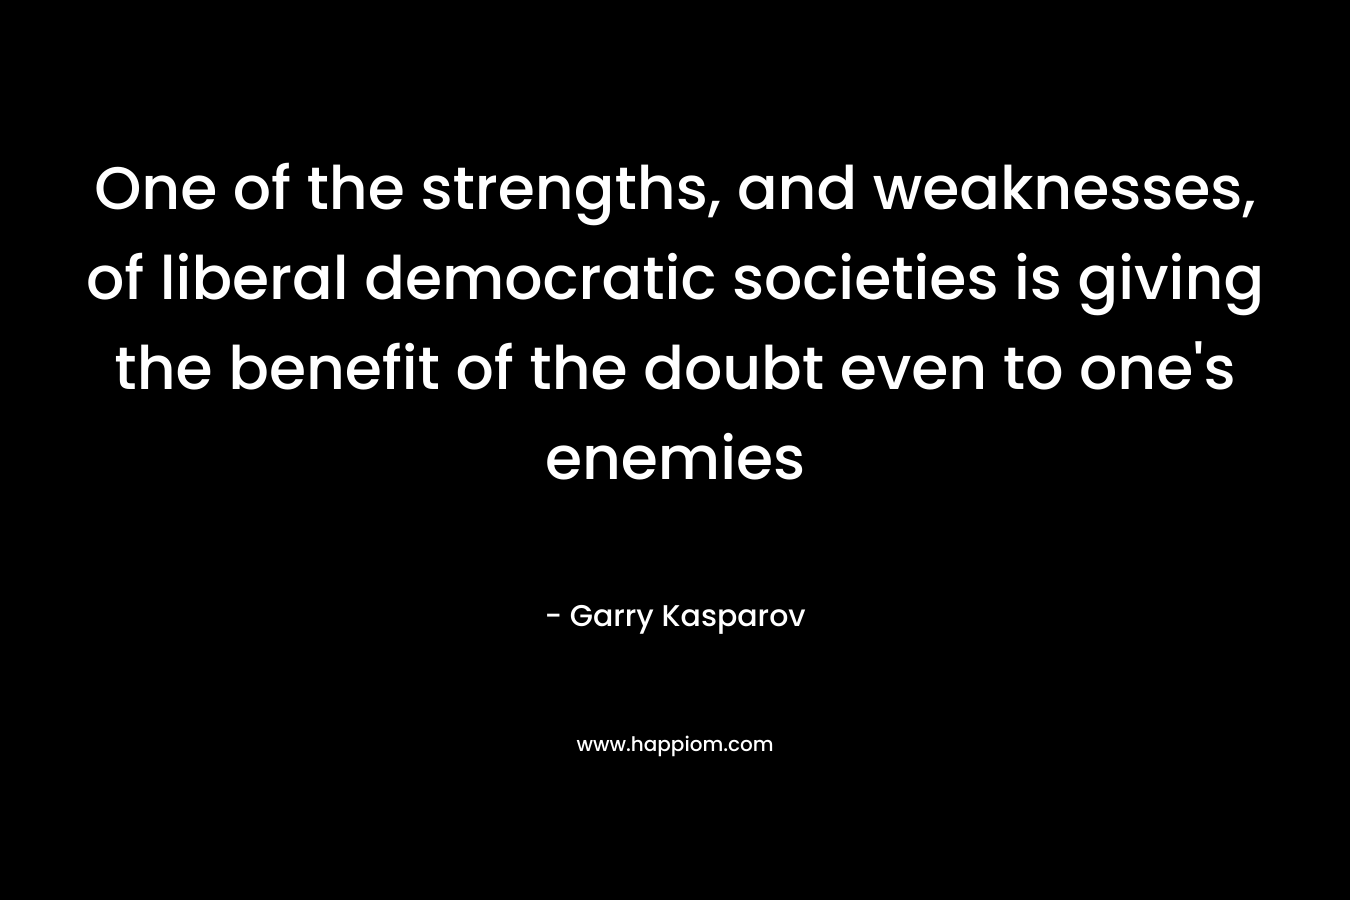 One of the strengths, and weaknesses, of liberal democratic societies is giving the benefit of the doubt even to one’s enemies – Garry Kasparov